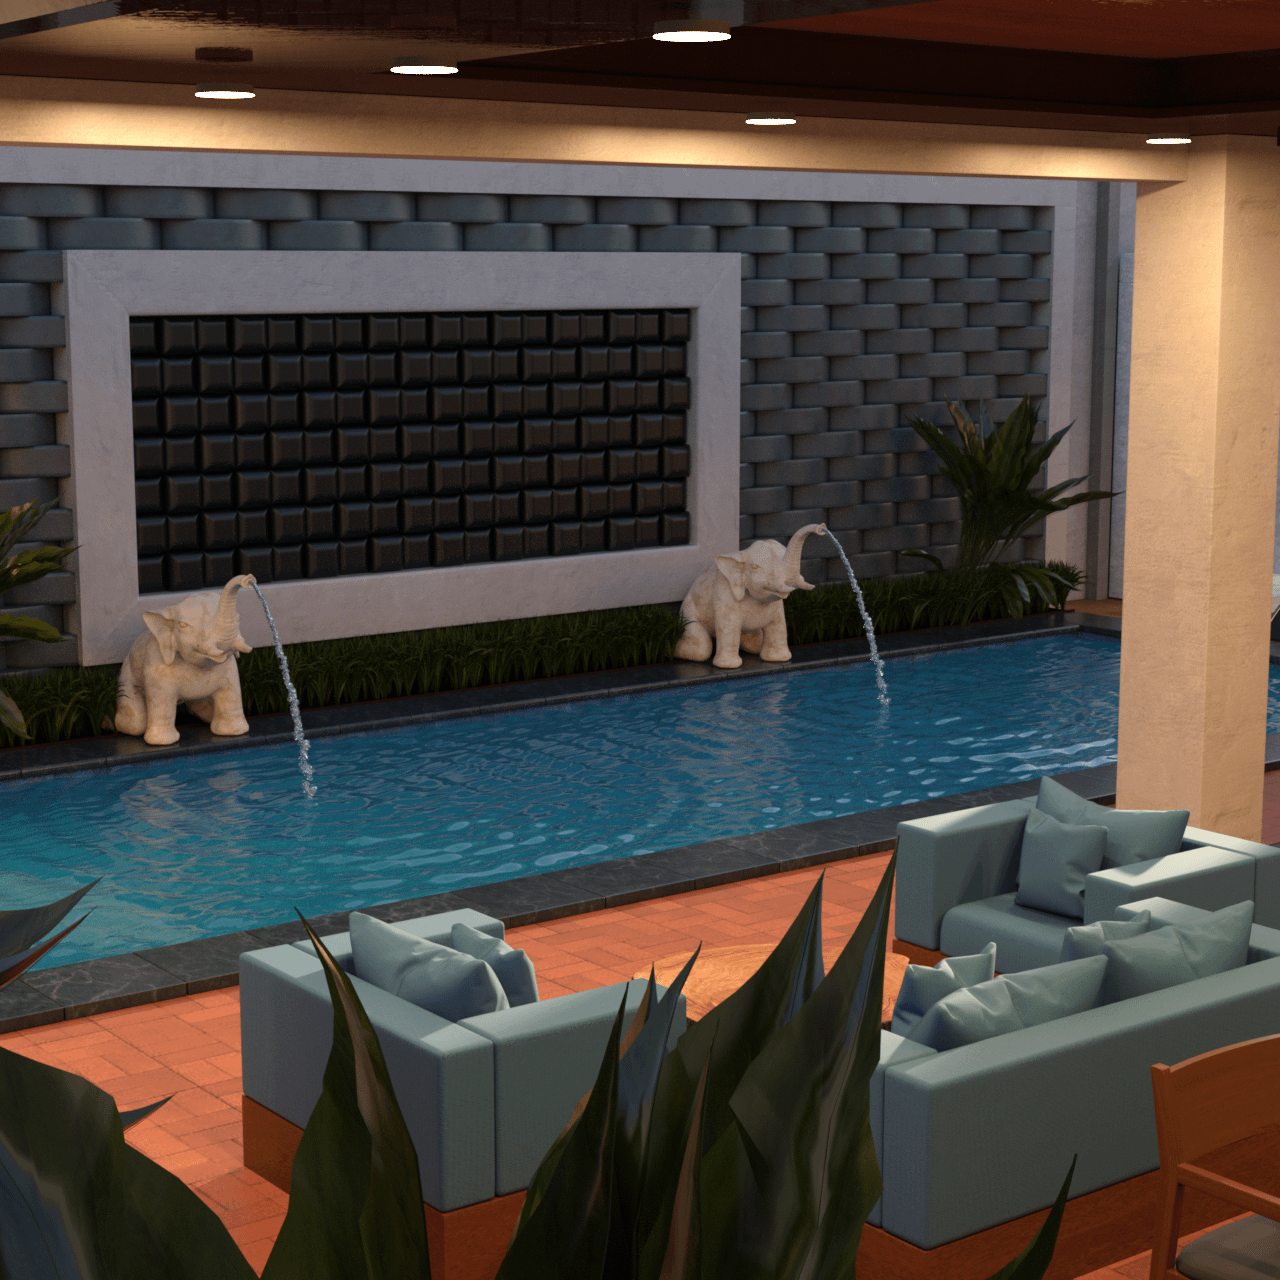 Seat area next to the swimming pool